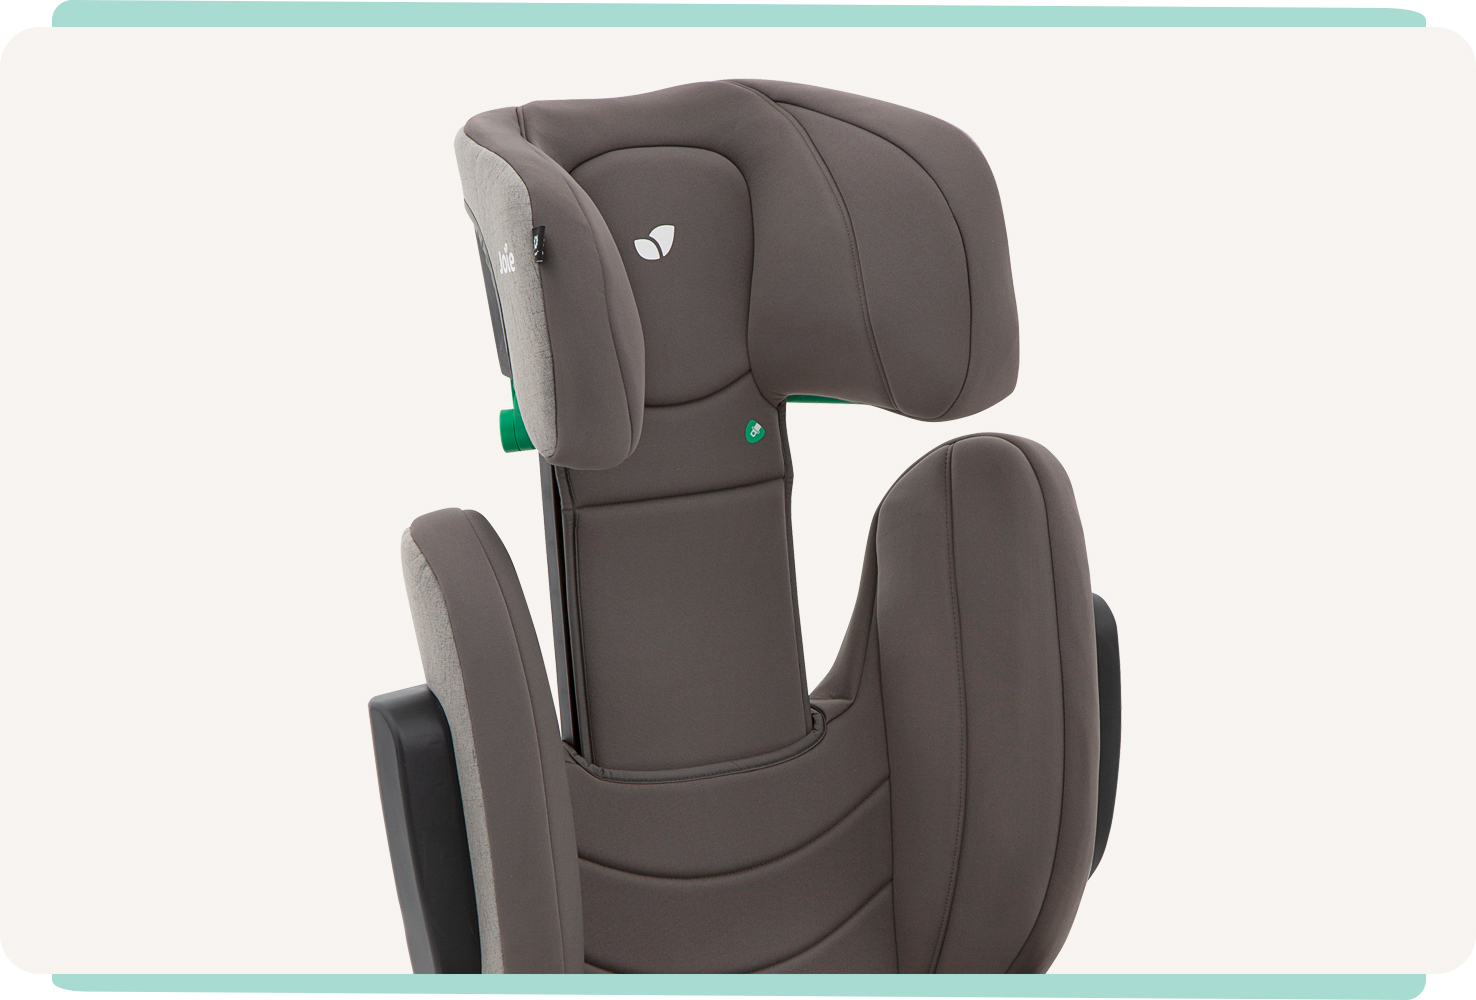  Closeup on a gray Joie I-Trillo LX booster seat with the headrest fully raised.